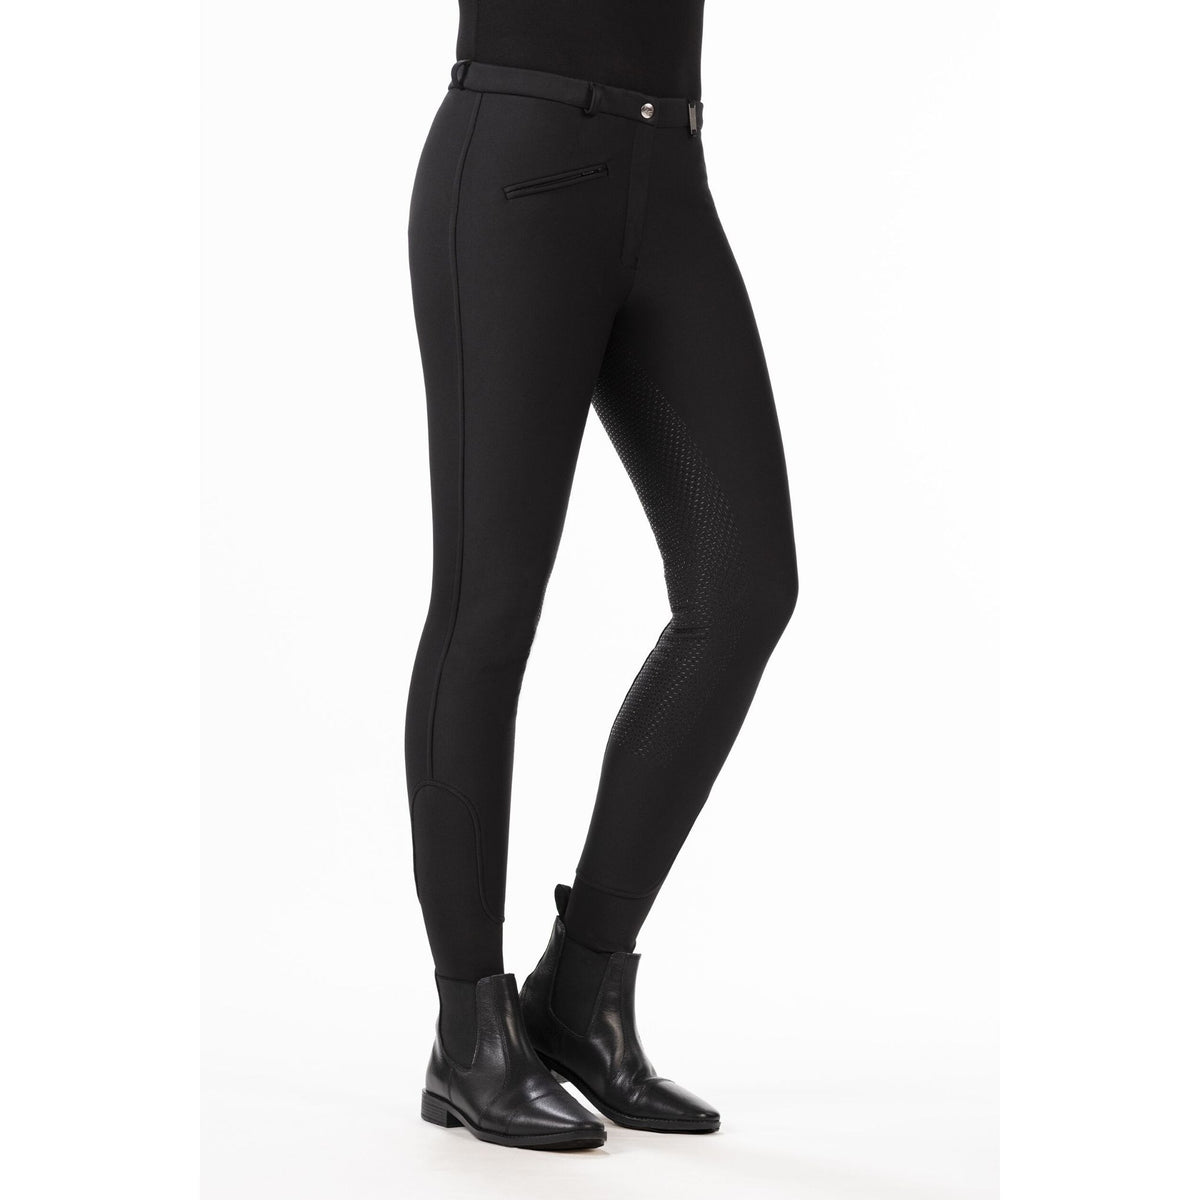 Sideview of winter softshell breeches.